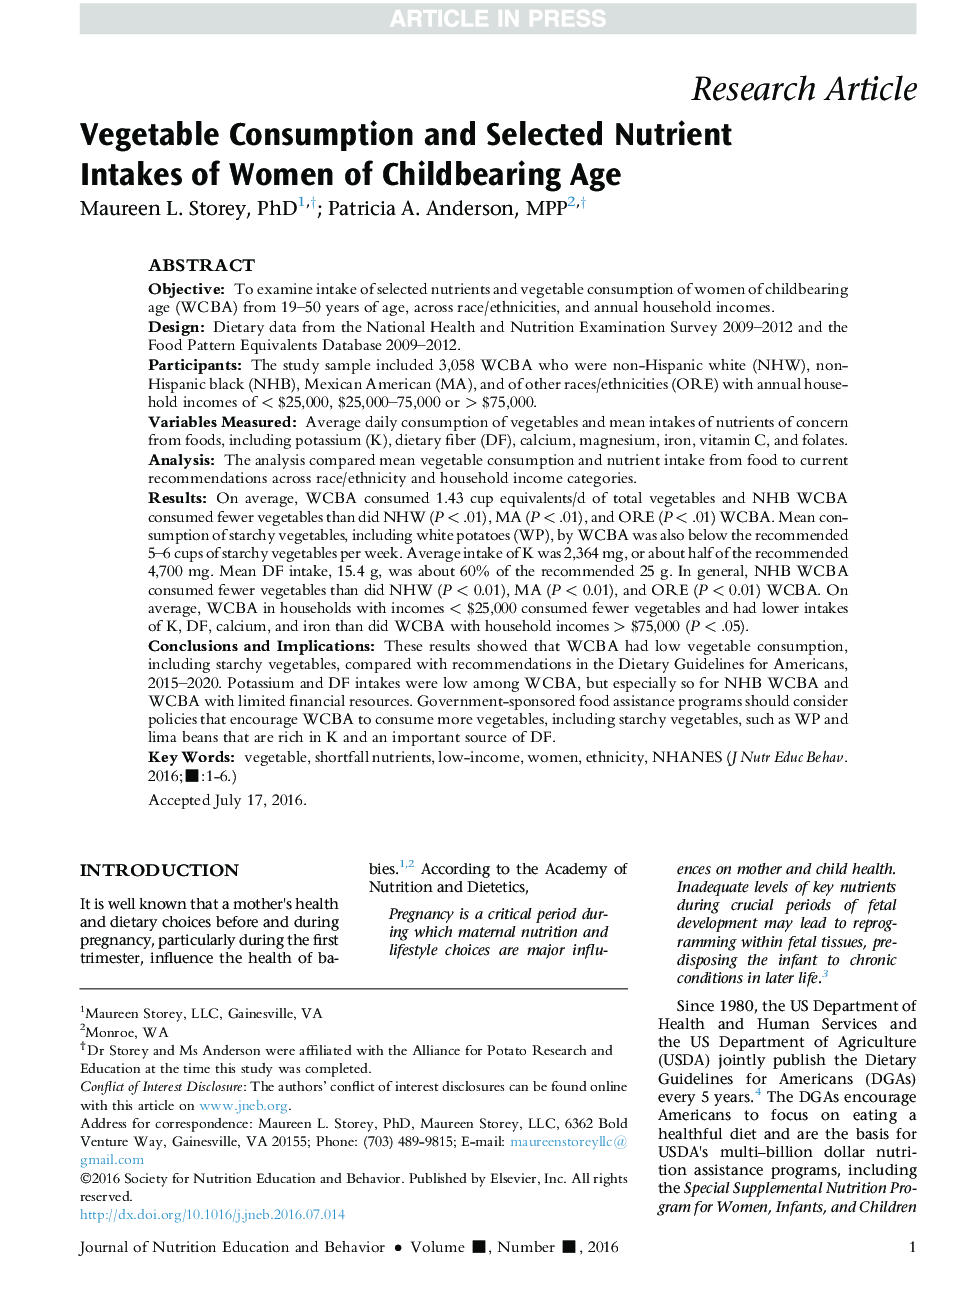 Vegetable Consumption and Selected Nutrient Intakes of Women of Childbearing Age